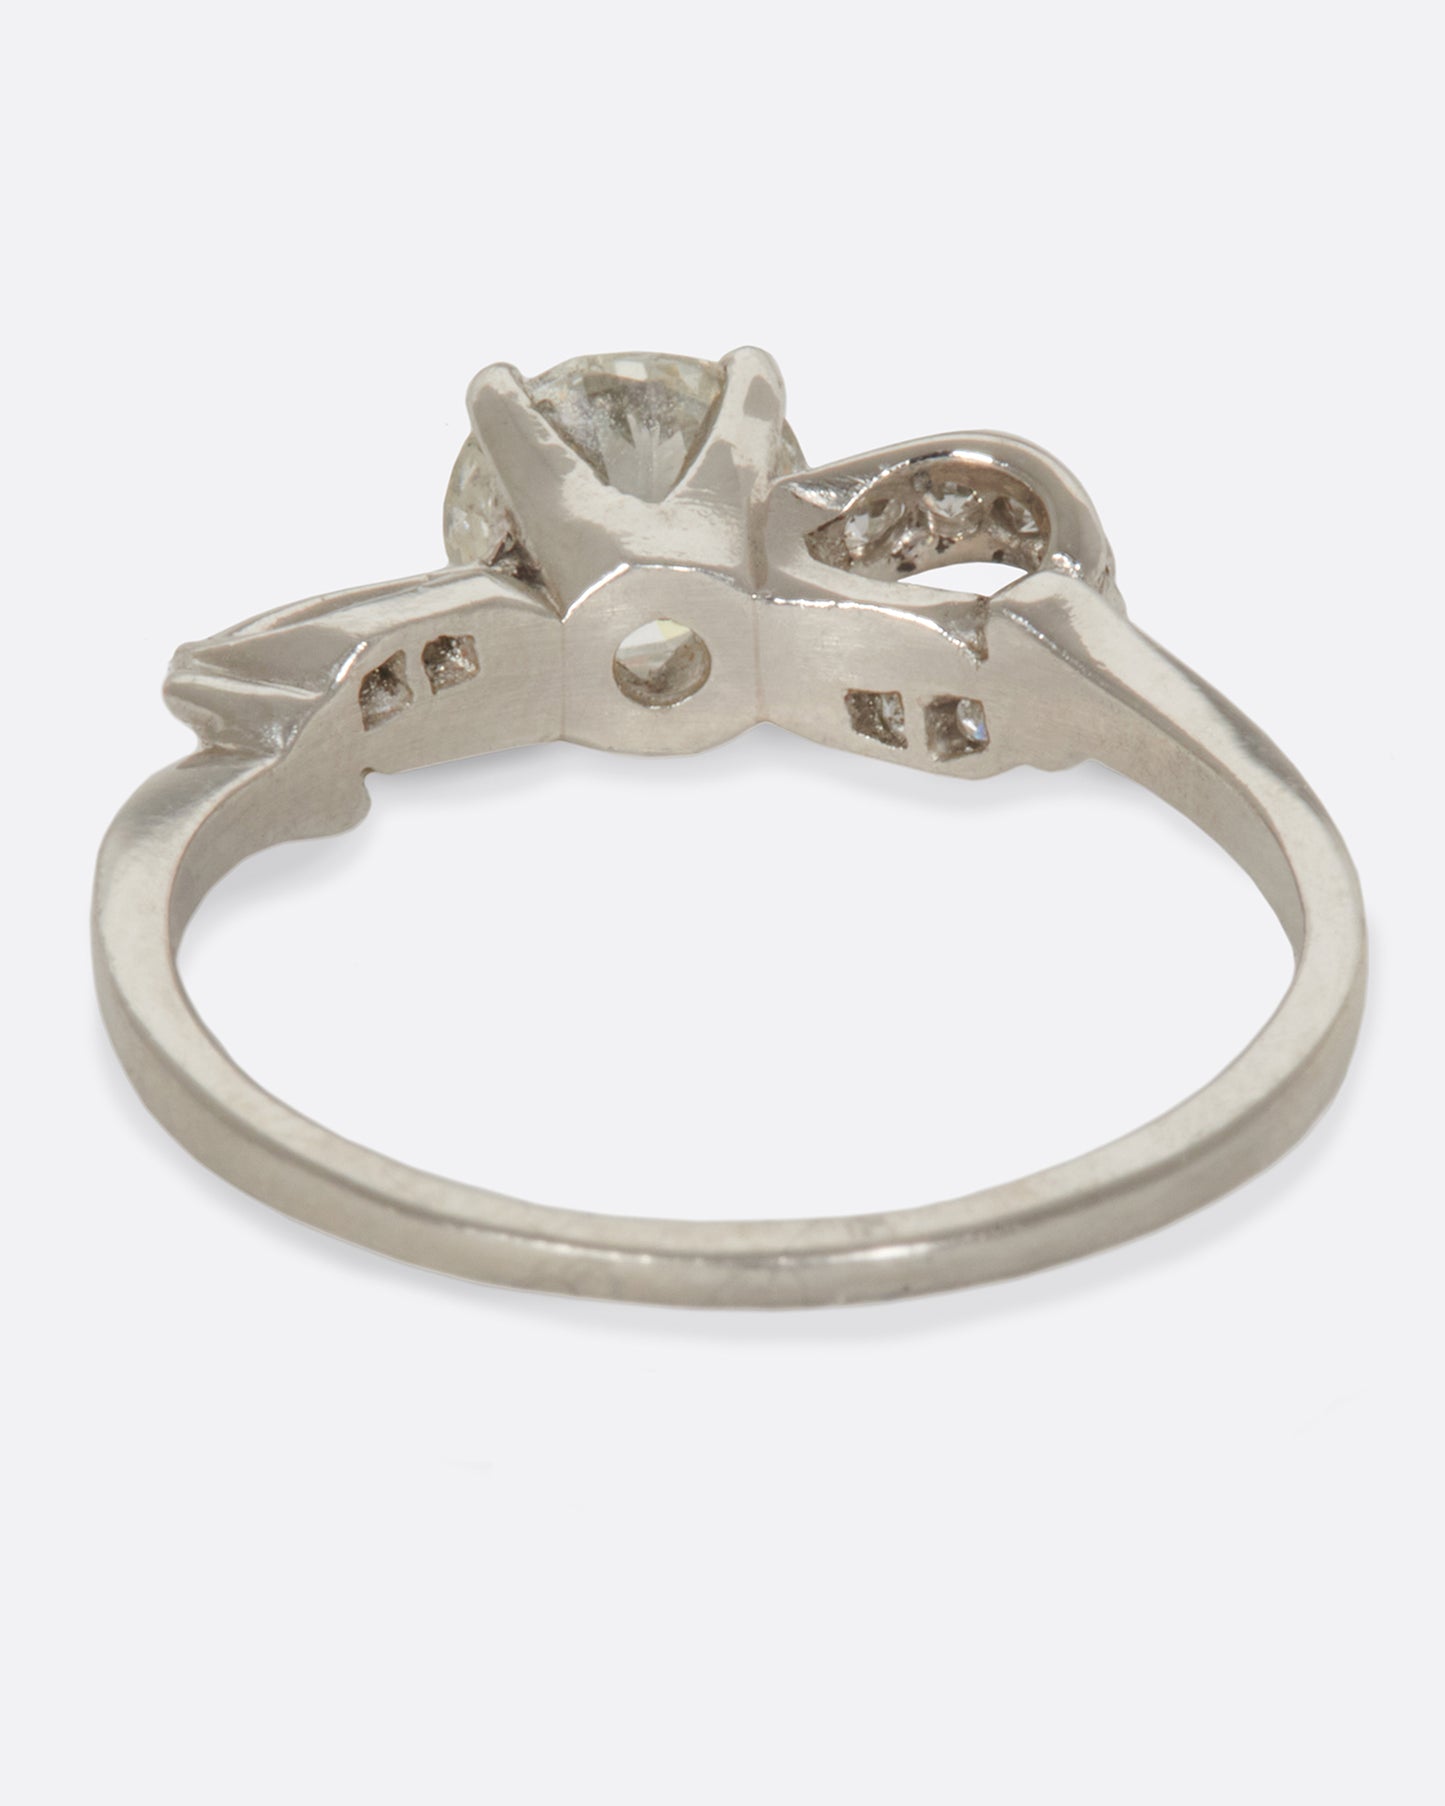 A prong set diamond ring with an infinity loop, covered in tension-set diamonds.